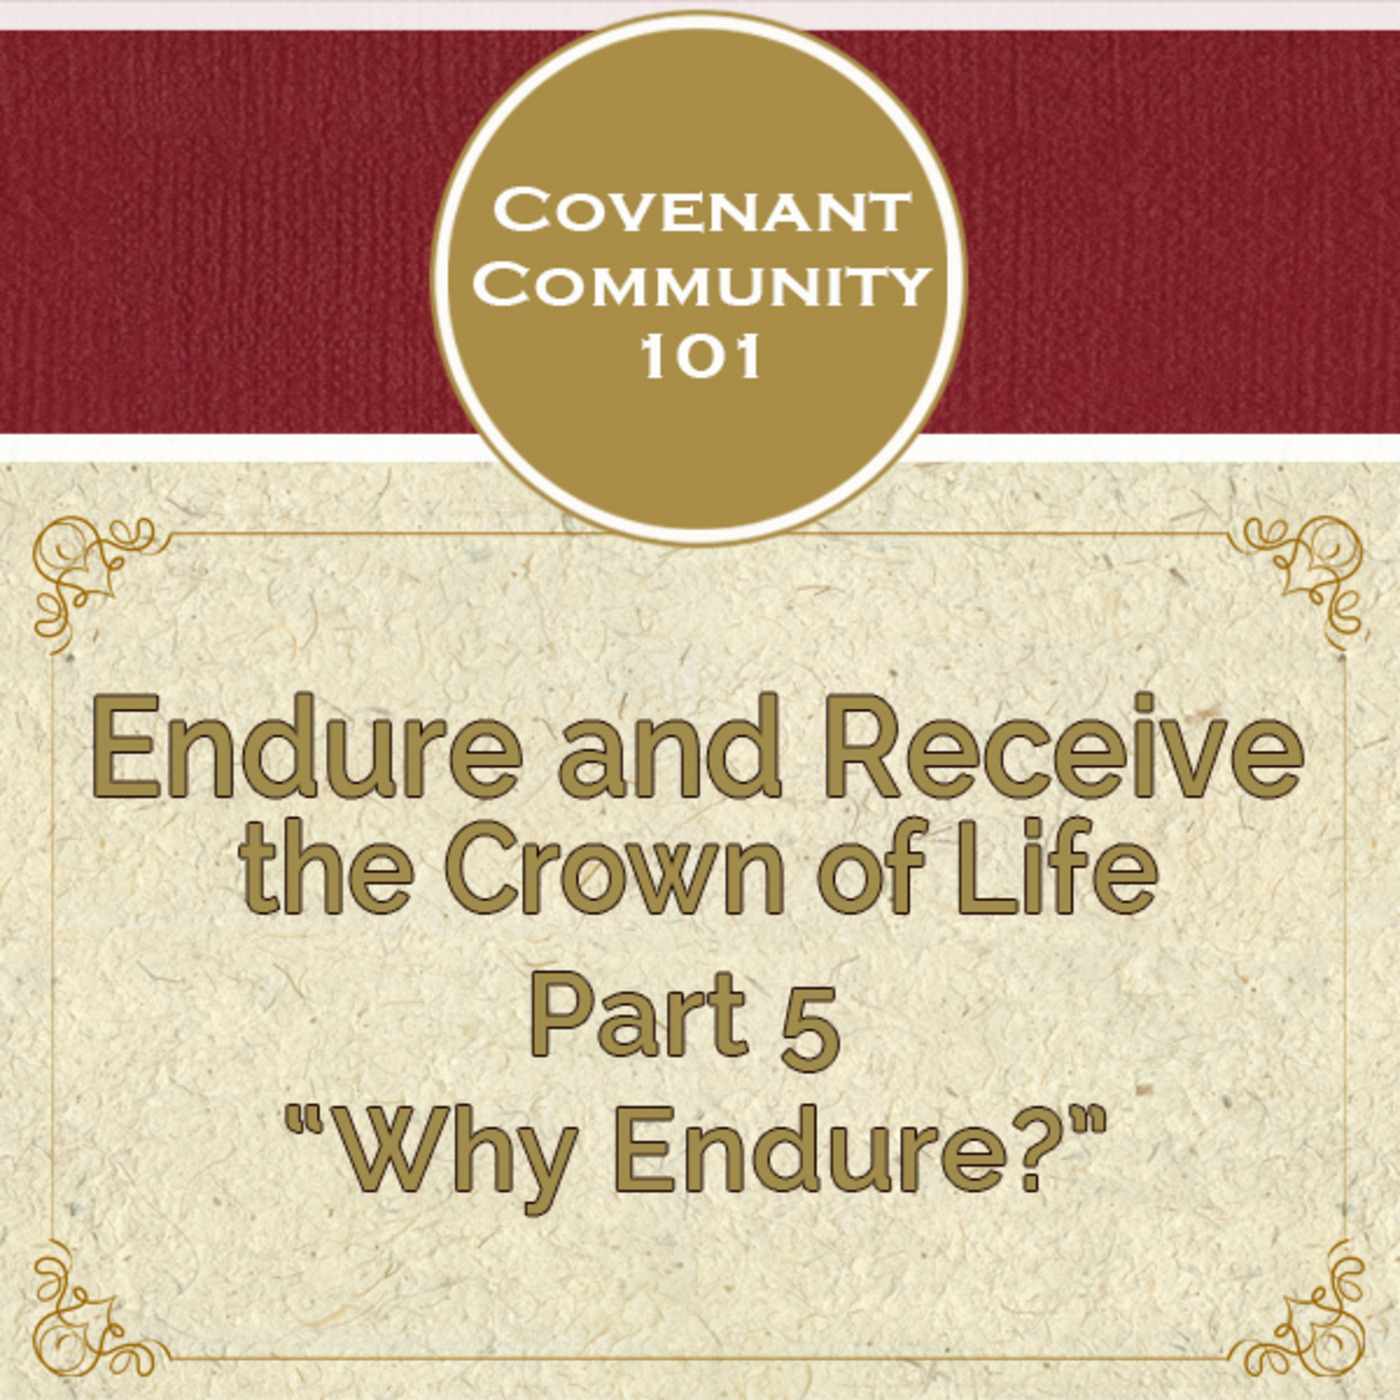 Covenant Community 101: Endure and Receive the Crown of Life - Part 5 “Why Endure”